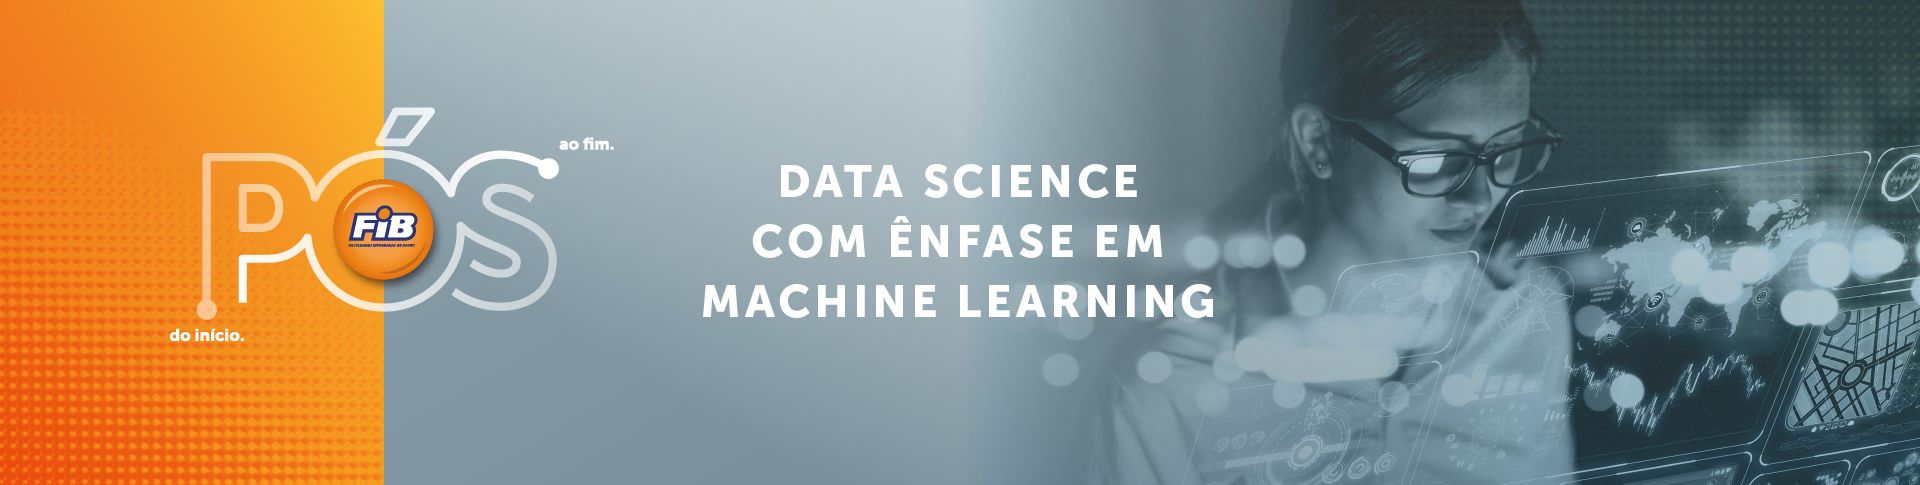 Data Science com nfase Machine Learning